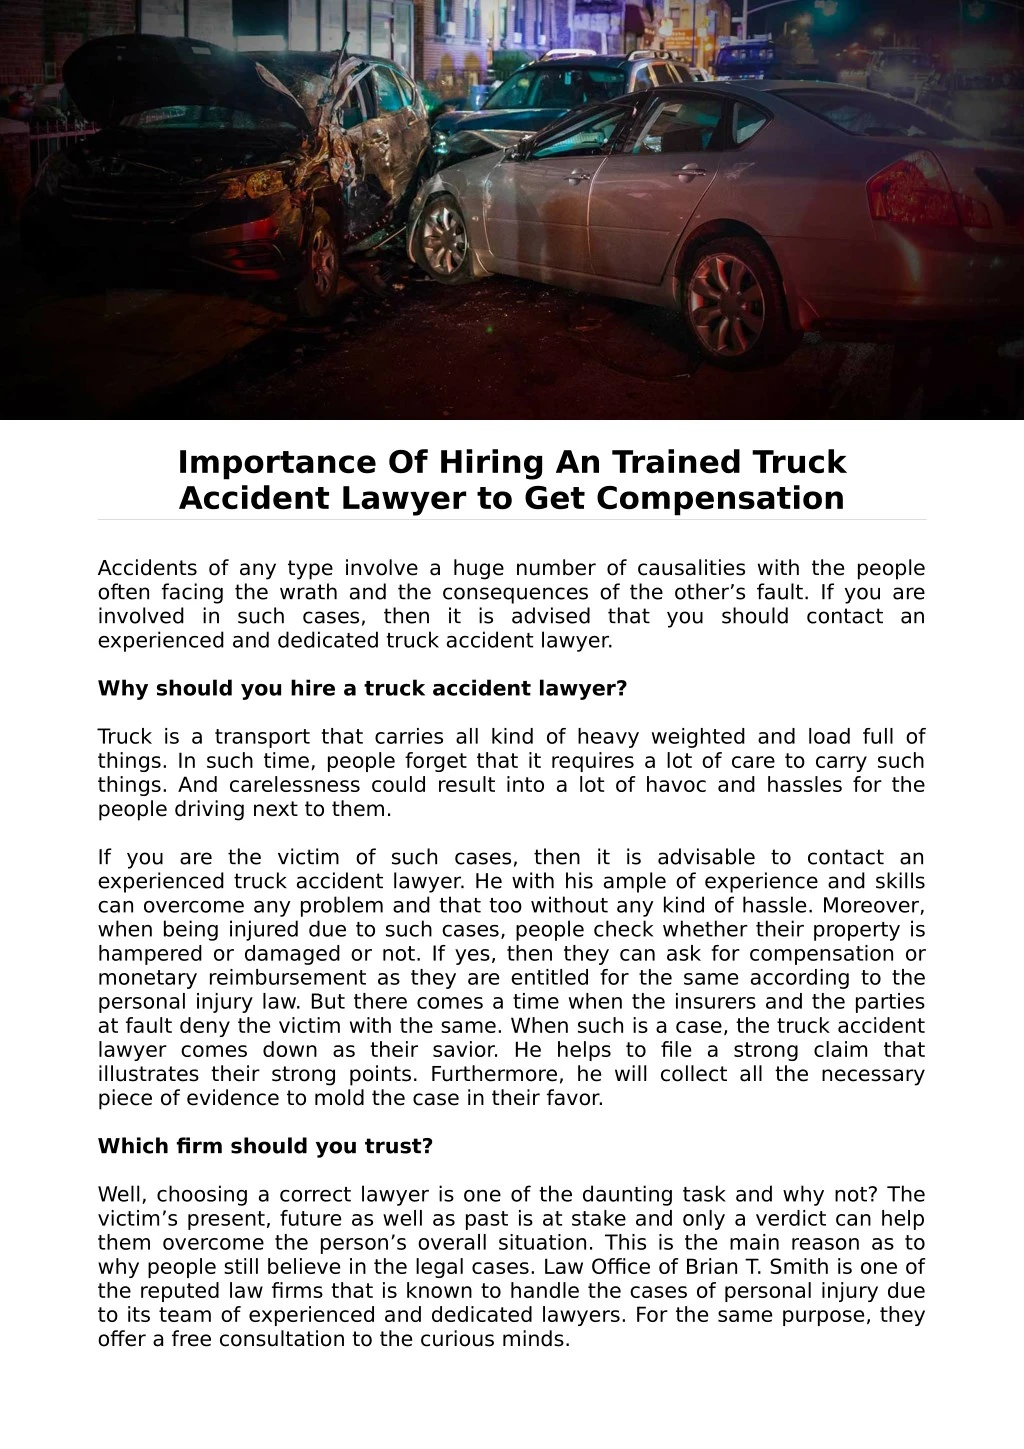 importance of hiring an trained truck accident